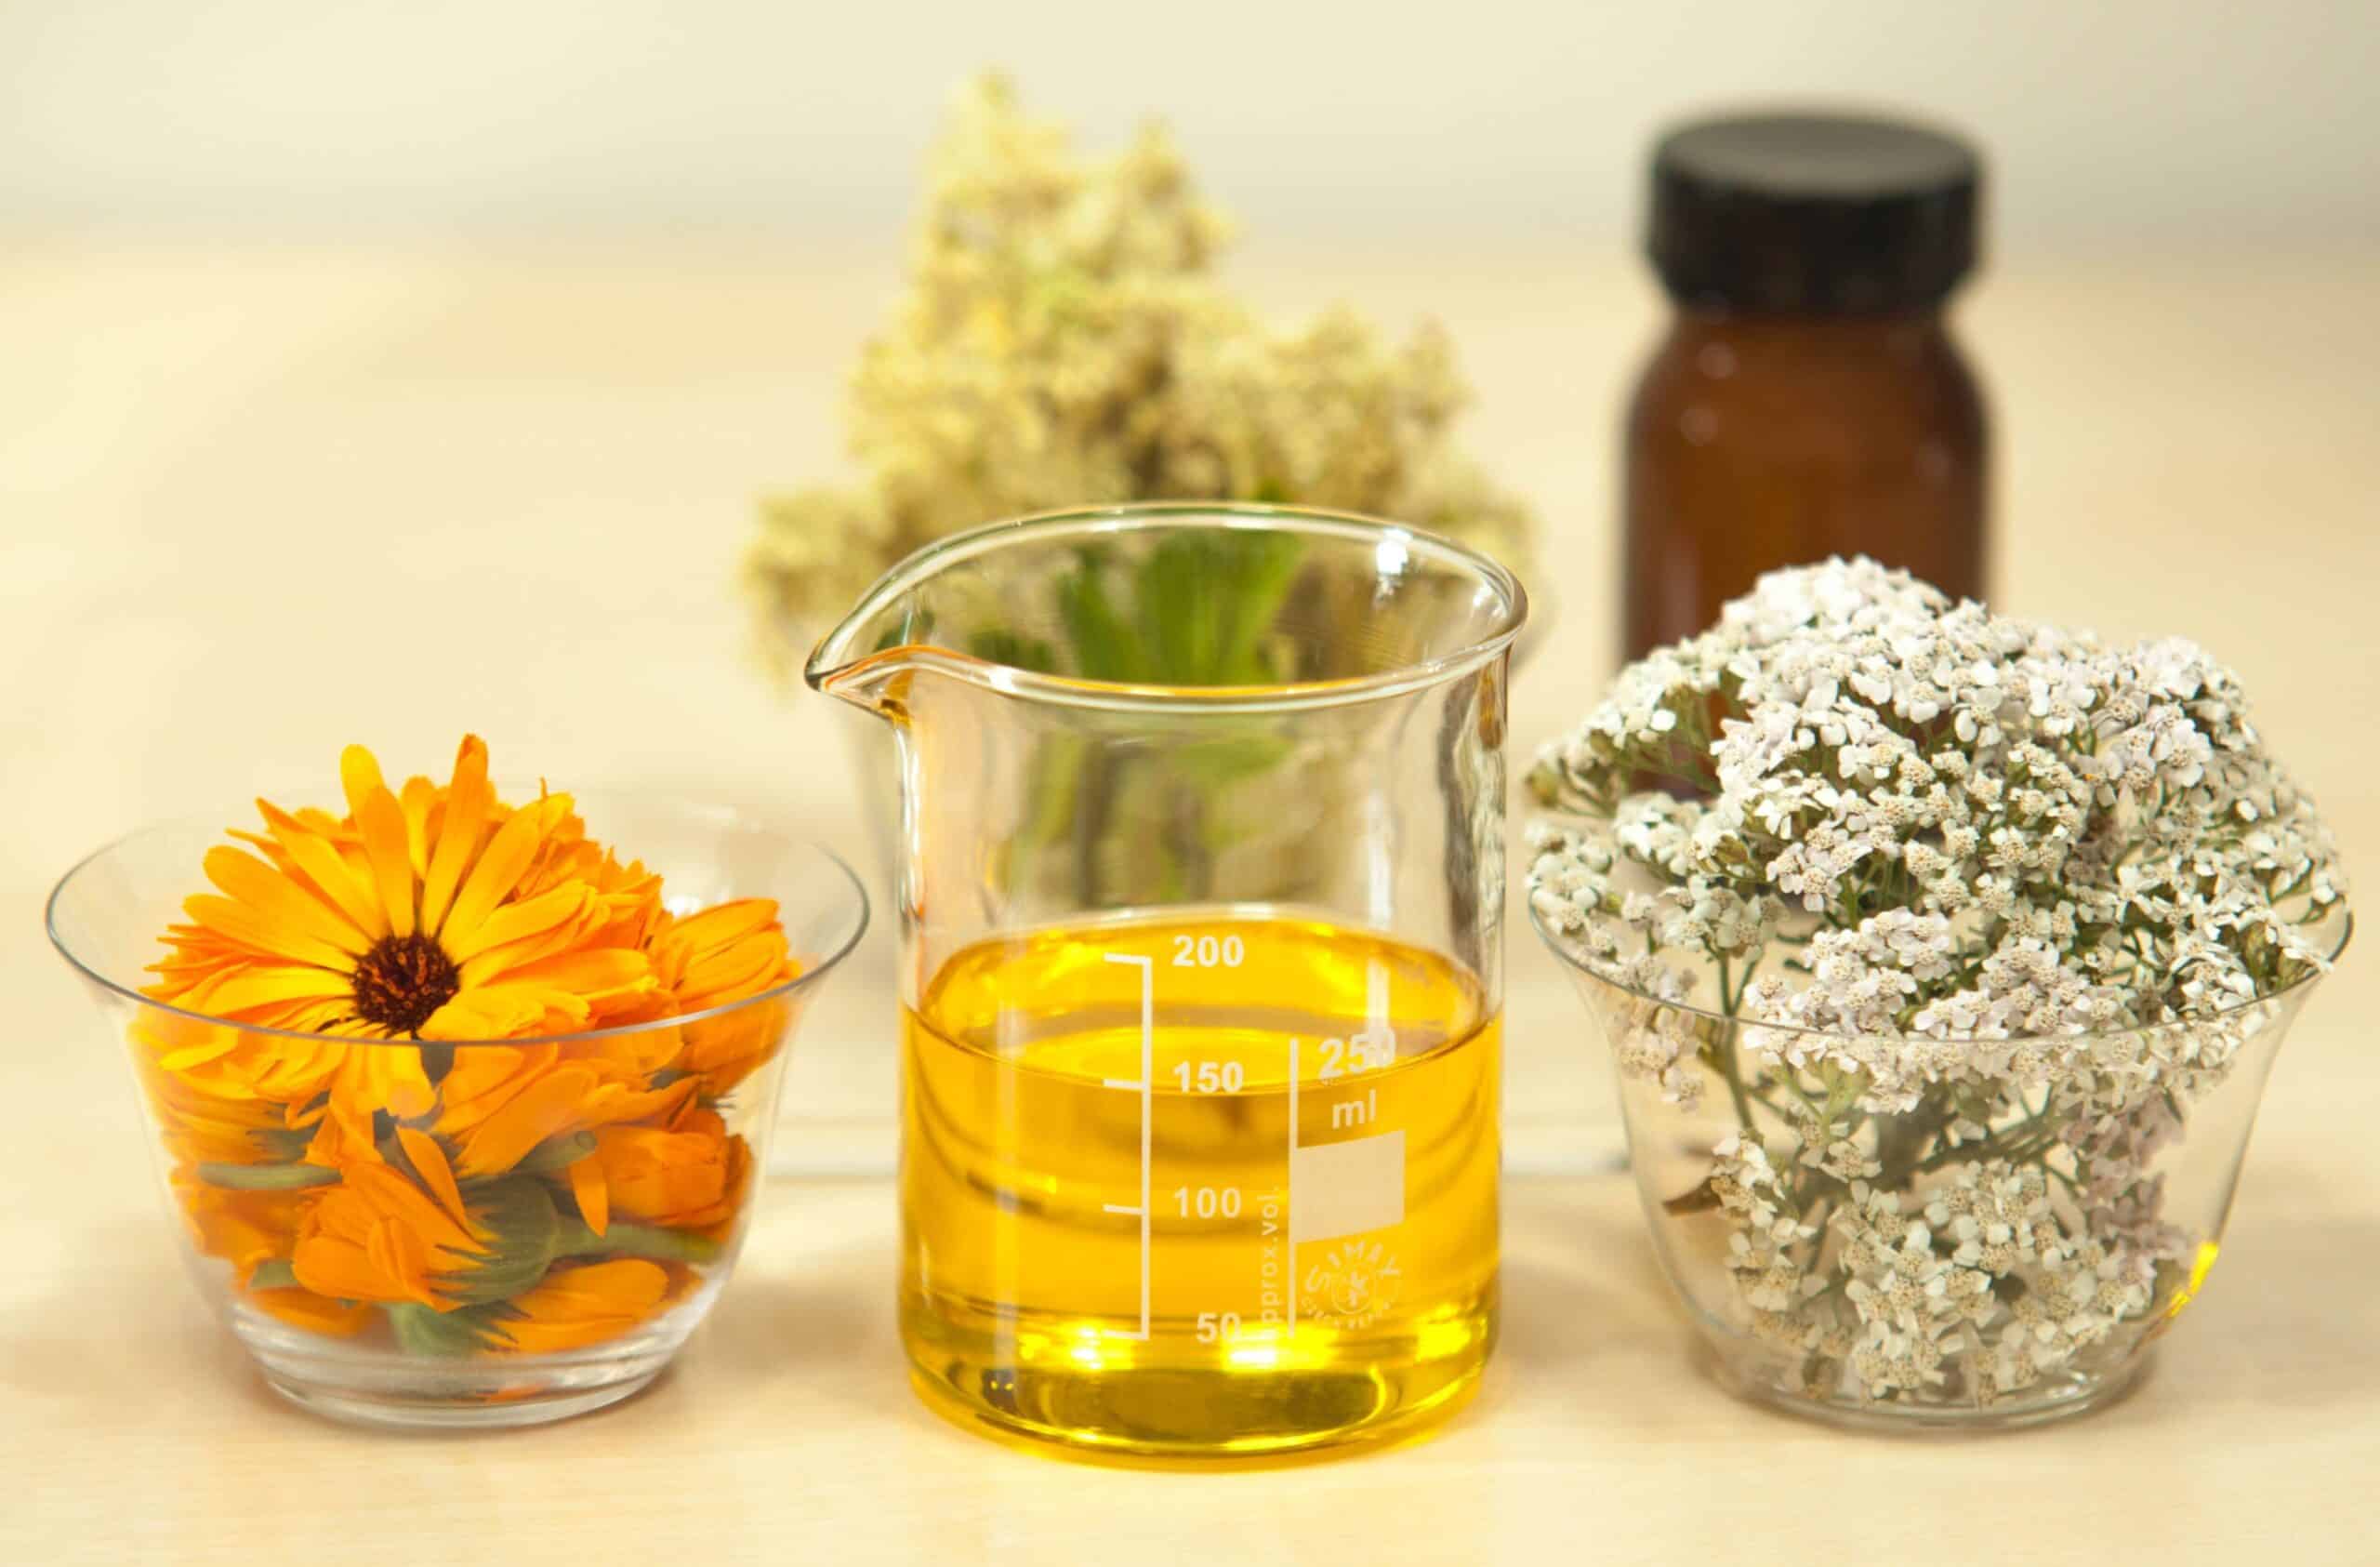 Let’s Get Creative! Mixing and Blending Essential Oils